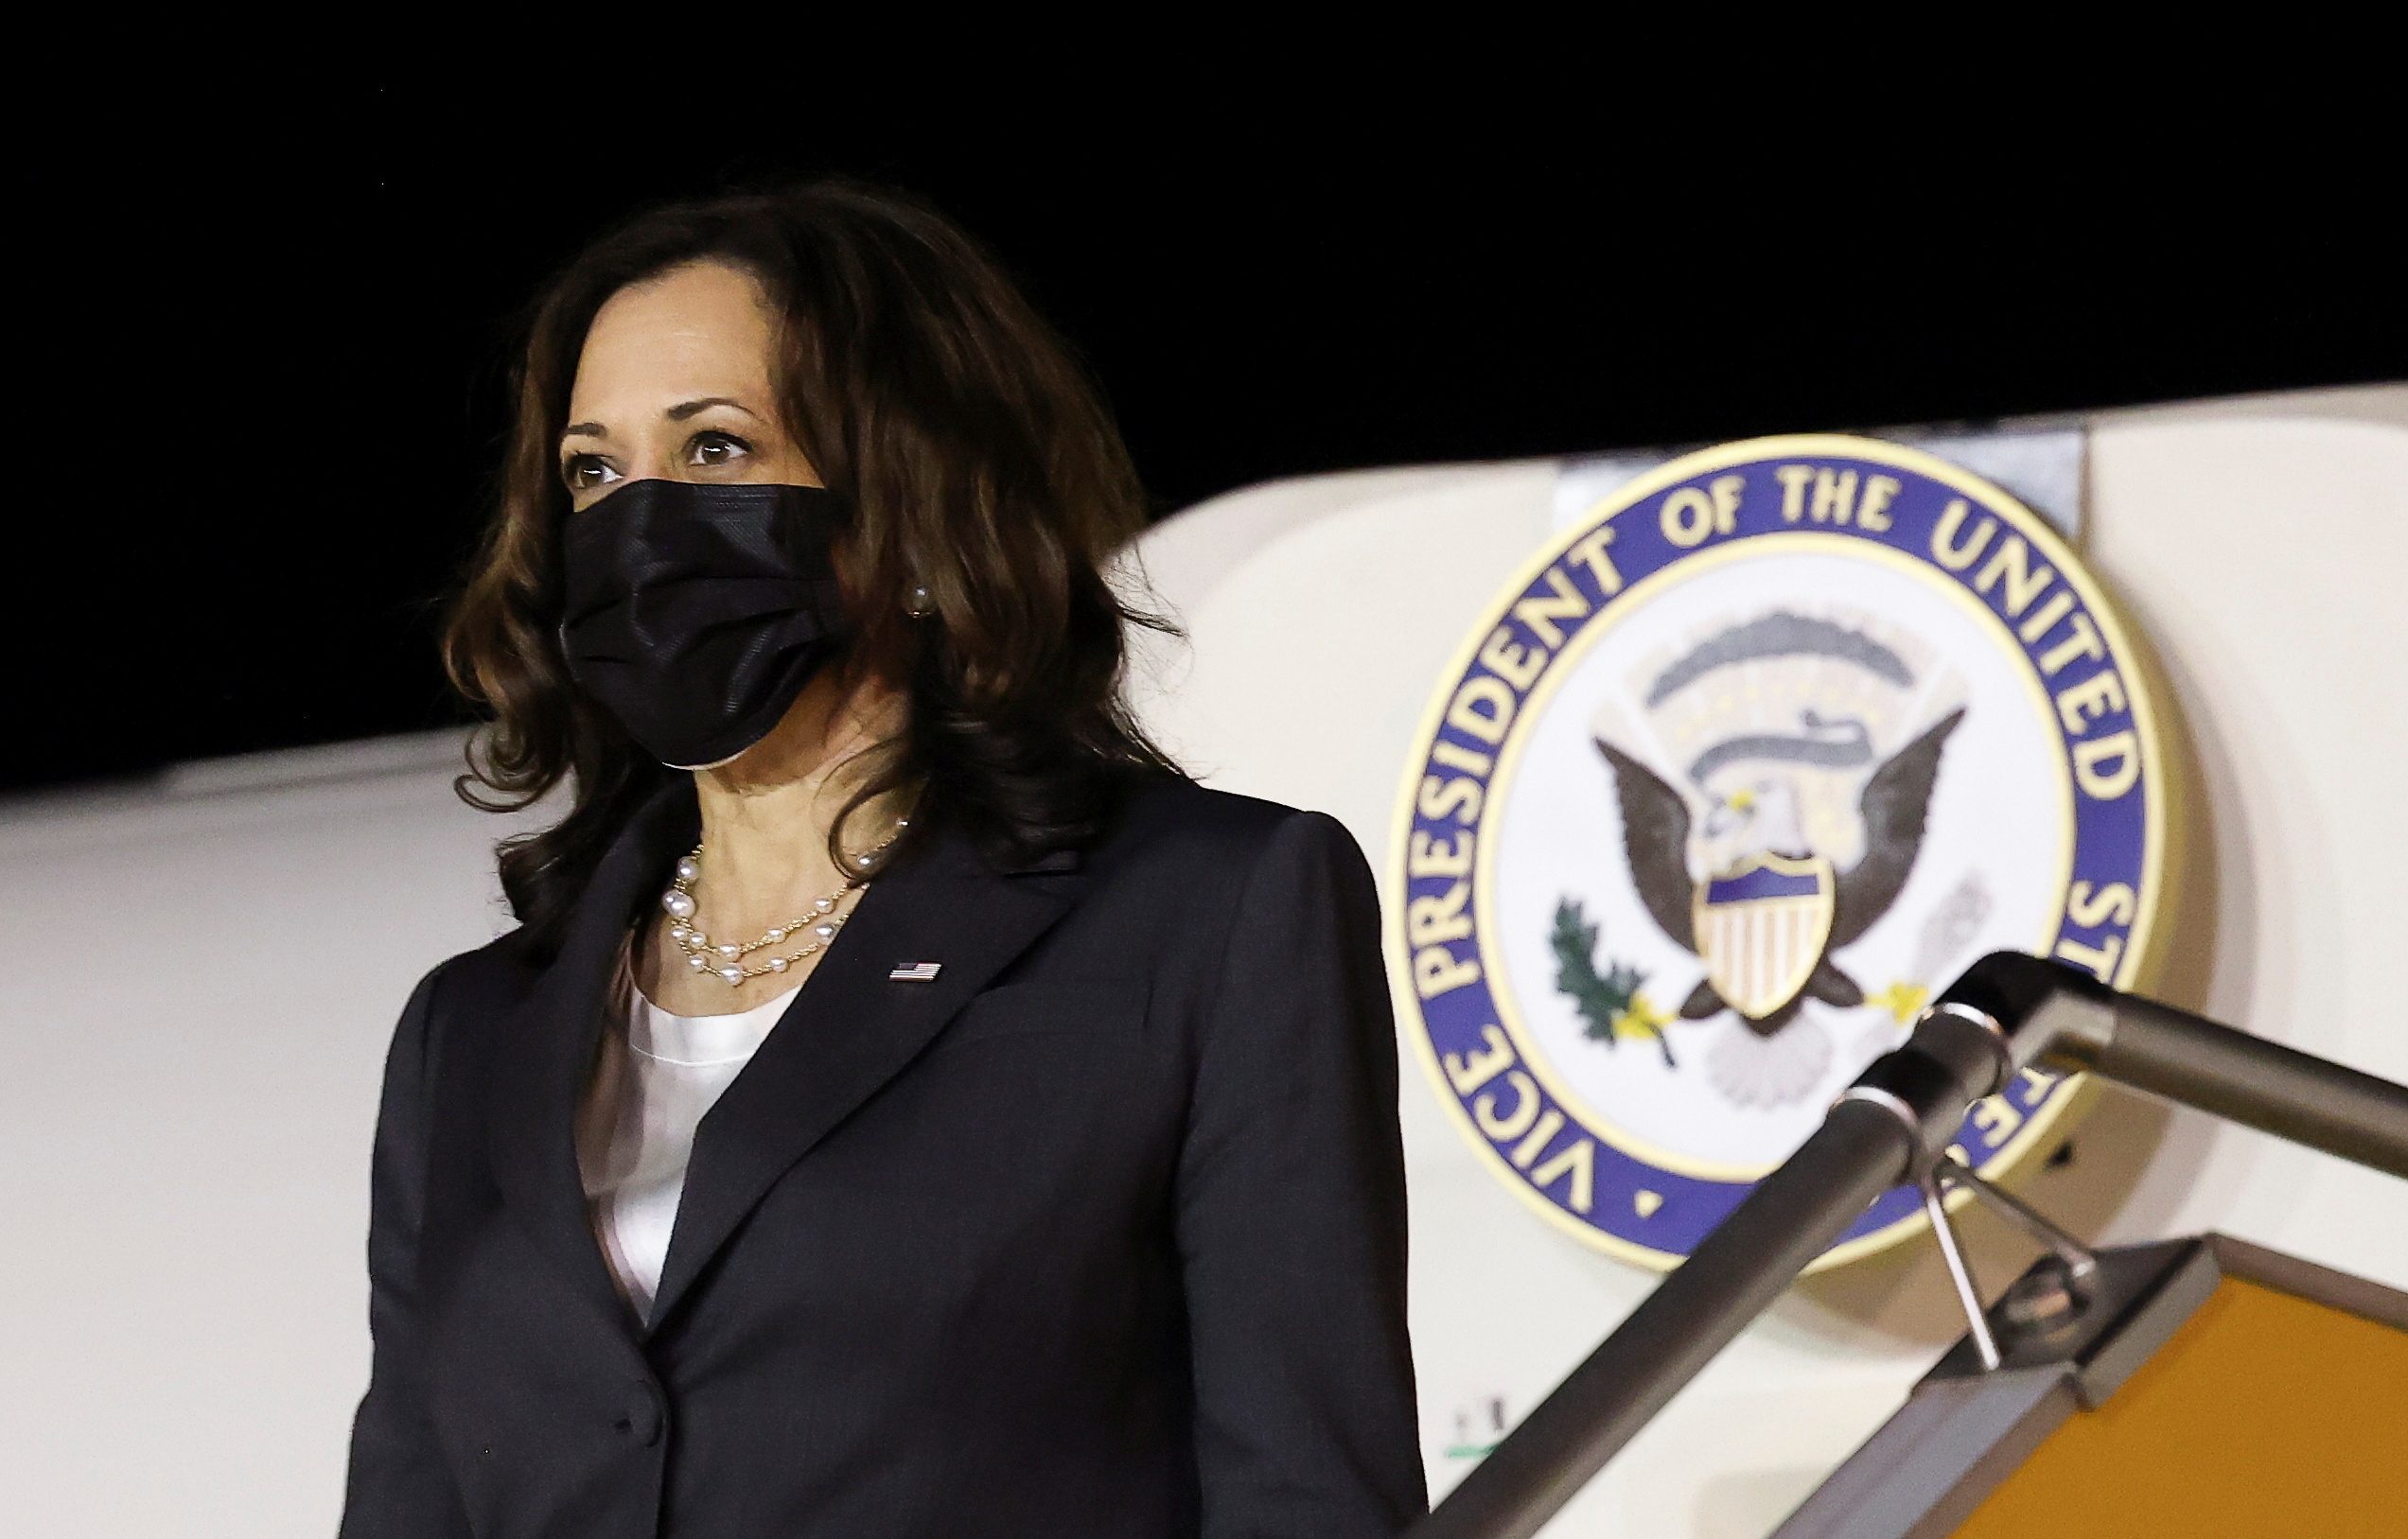 US VP Harris forges on with Vietnam trip despite mystery ‘health incident’